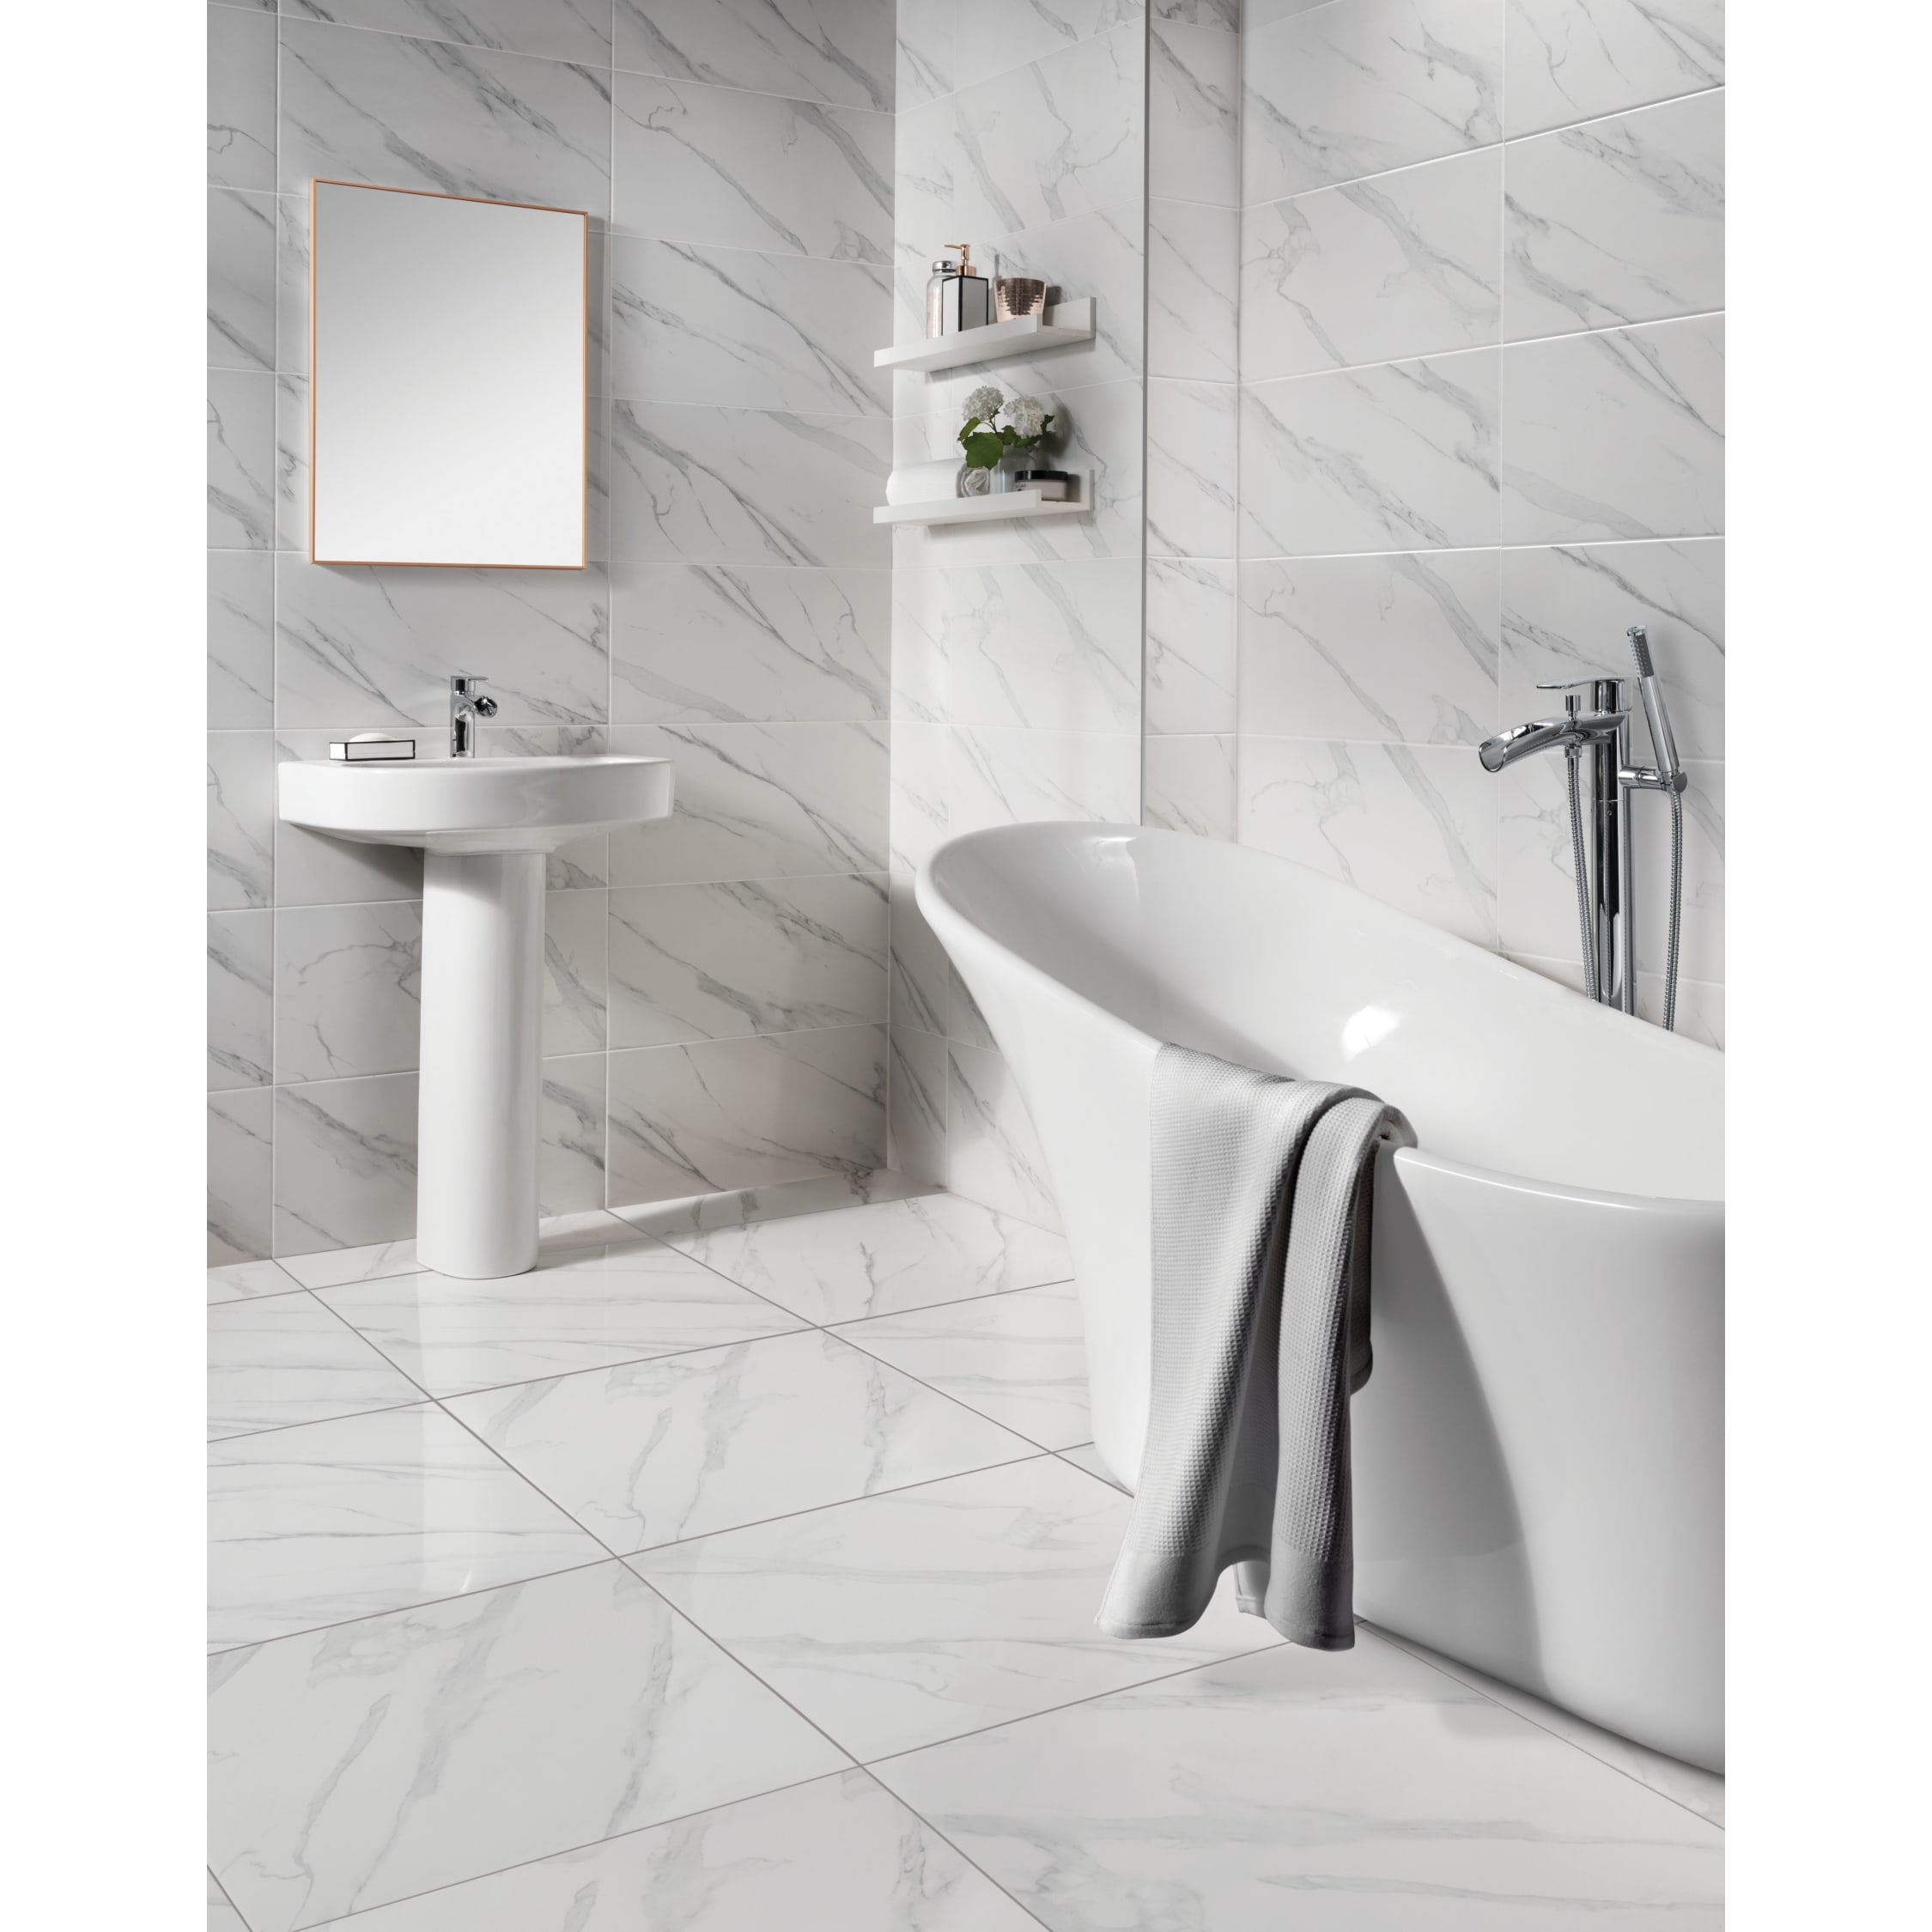 Wickes Calacatta Gloss White Marble Effect Glazed Porcelain Wall & Floor  Tile - 605 x 605mm | Wickes.co.uk